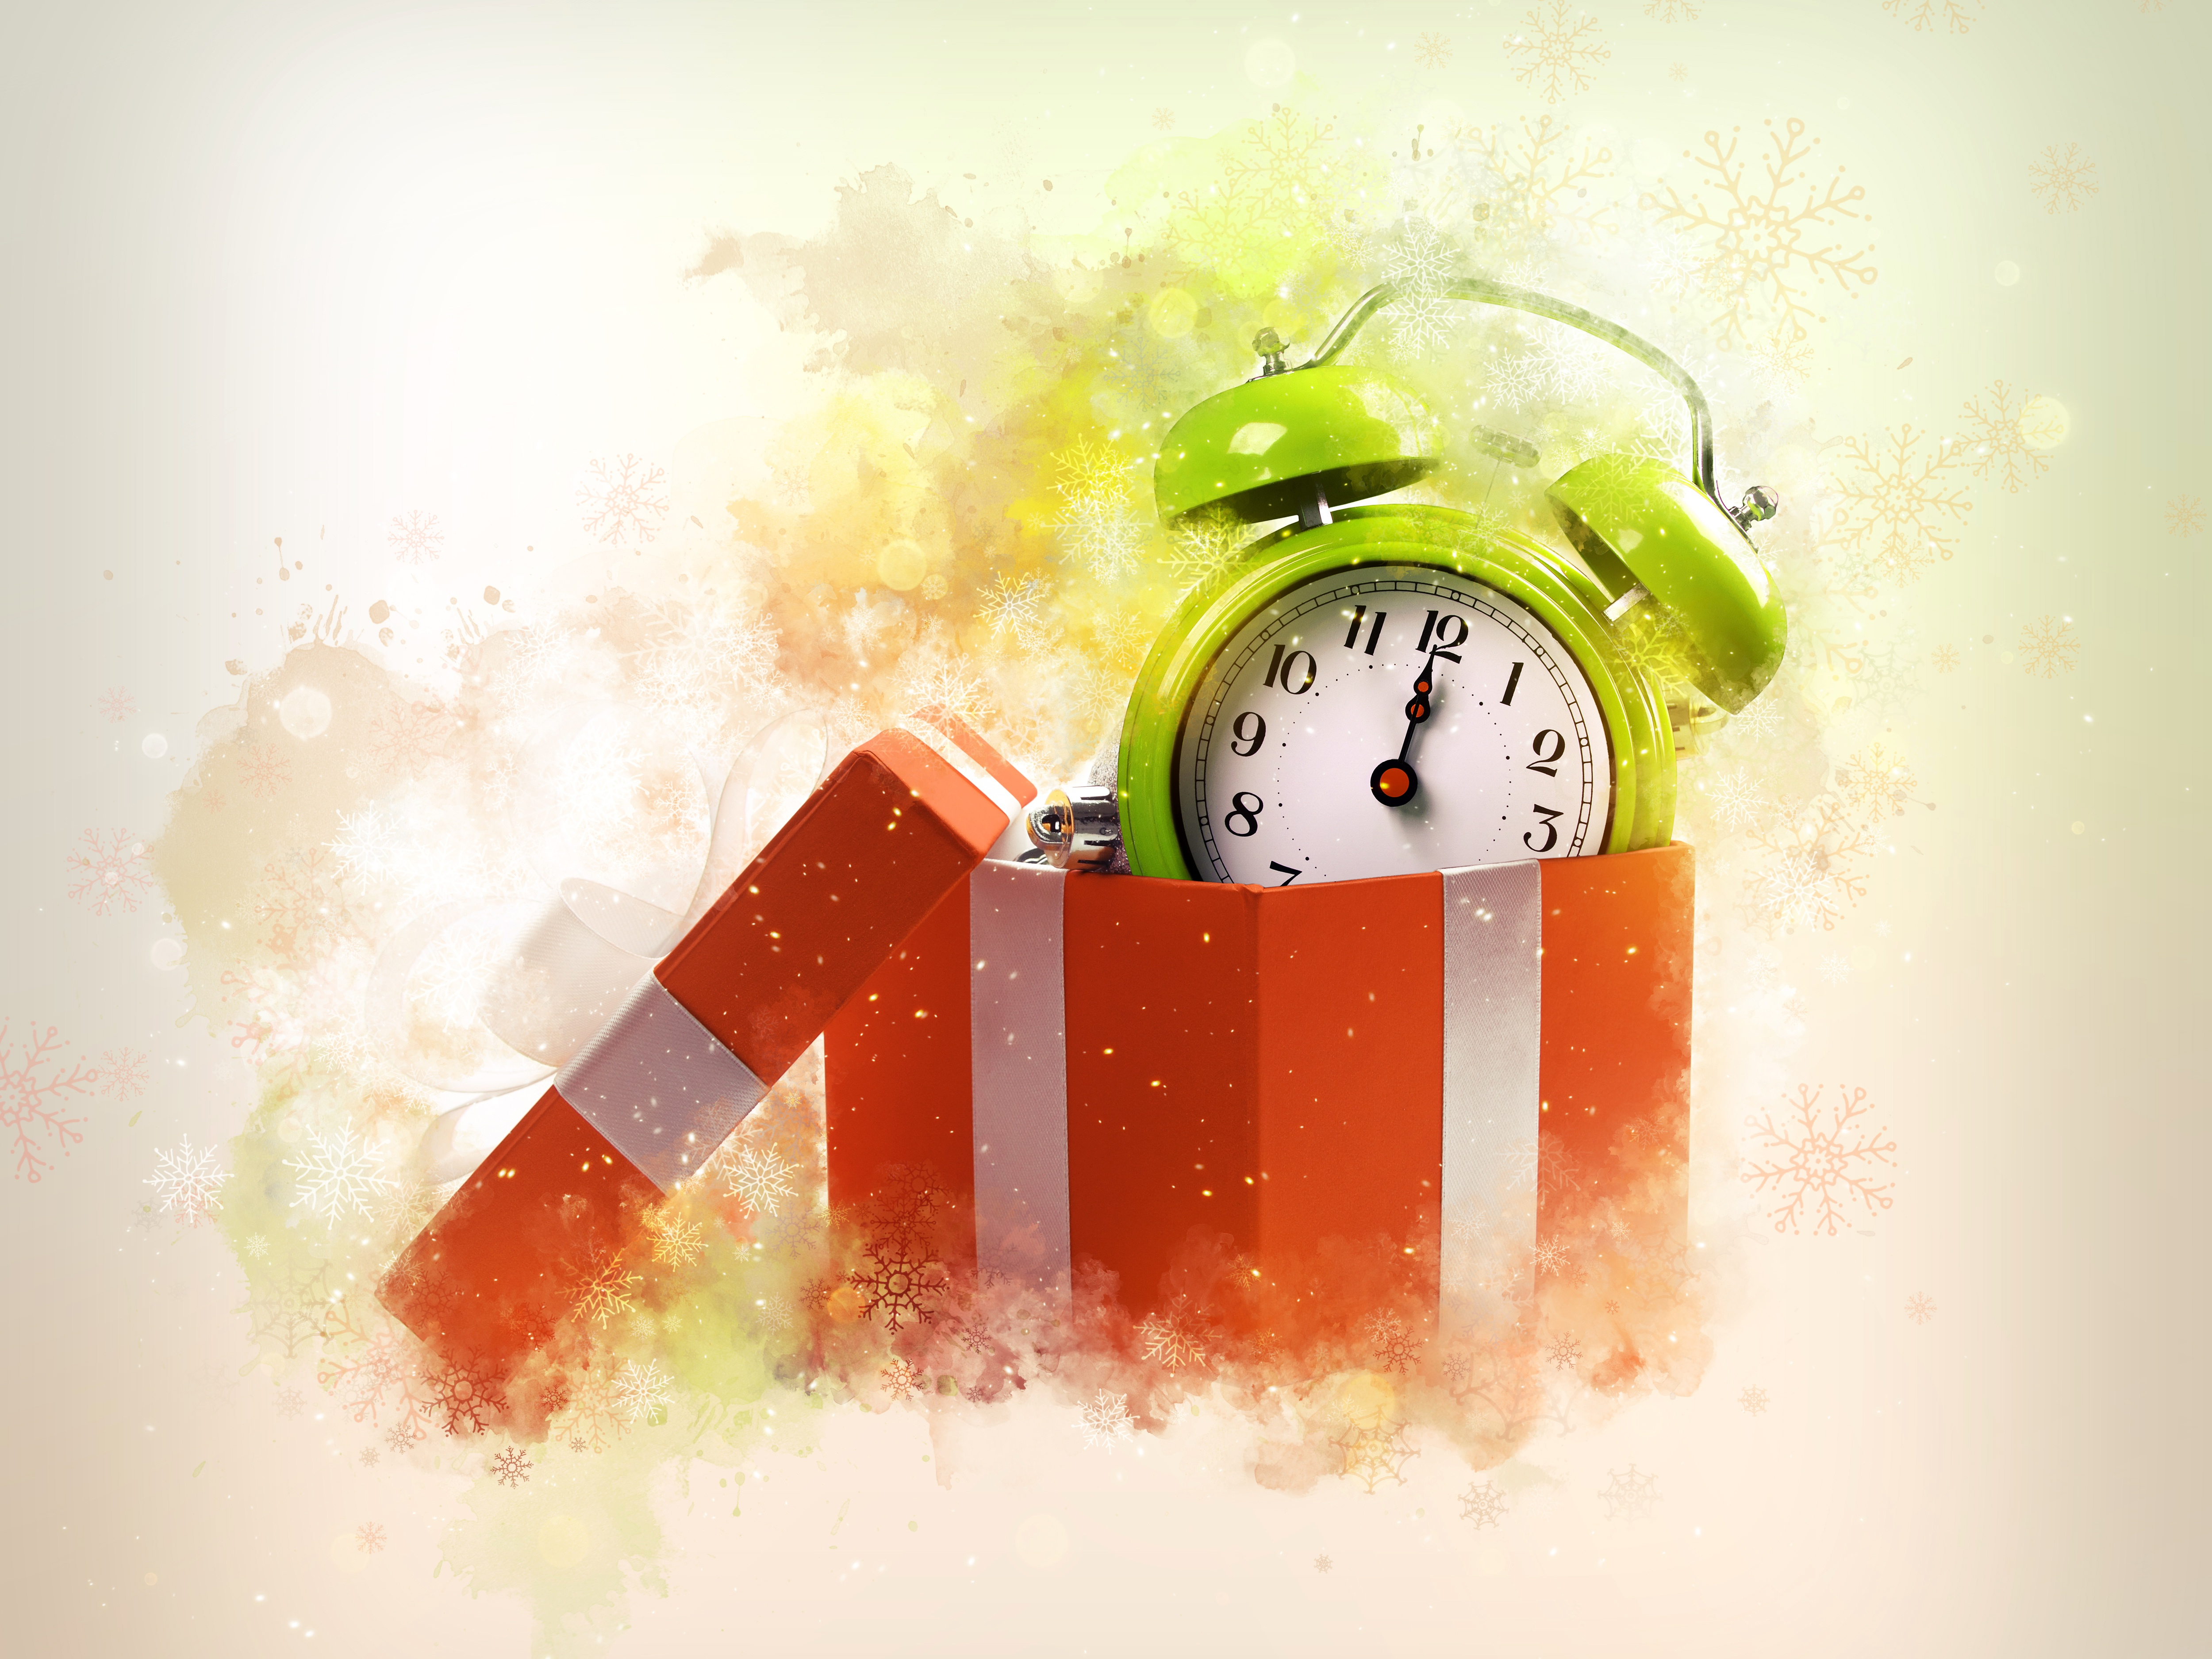 Merry christmas  new year wallpaper with xmas clock vector illustration   CanStock